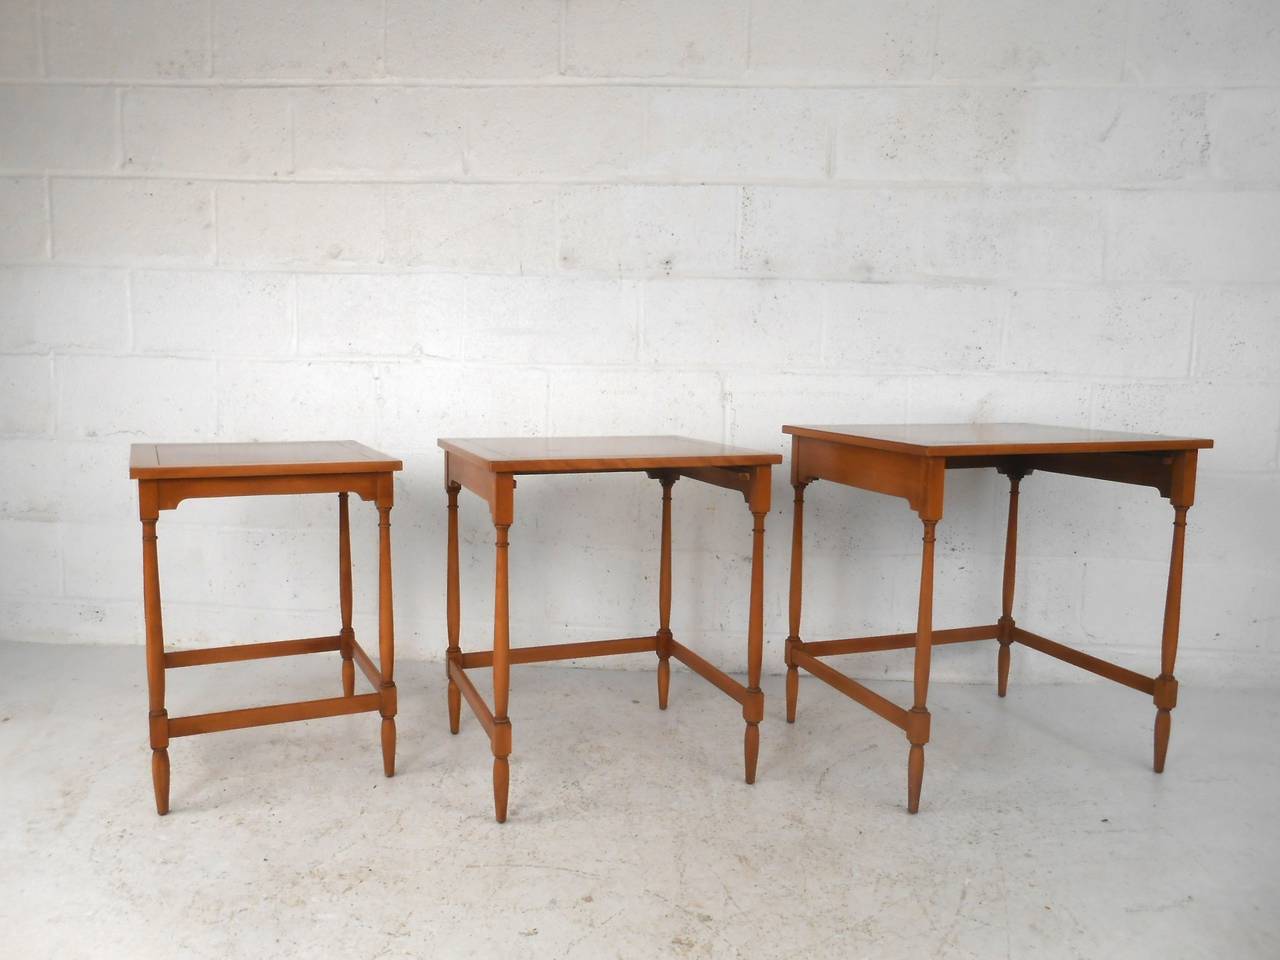 20th Century Set of Three Nesting Tables by Hekman For Sale